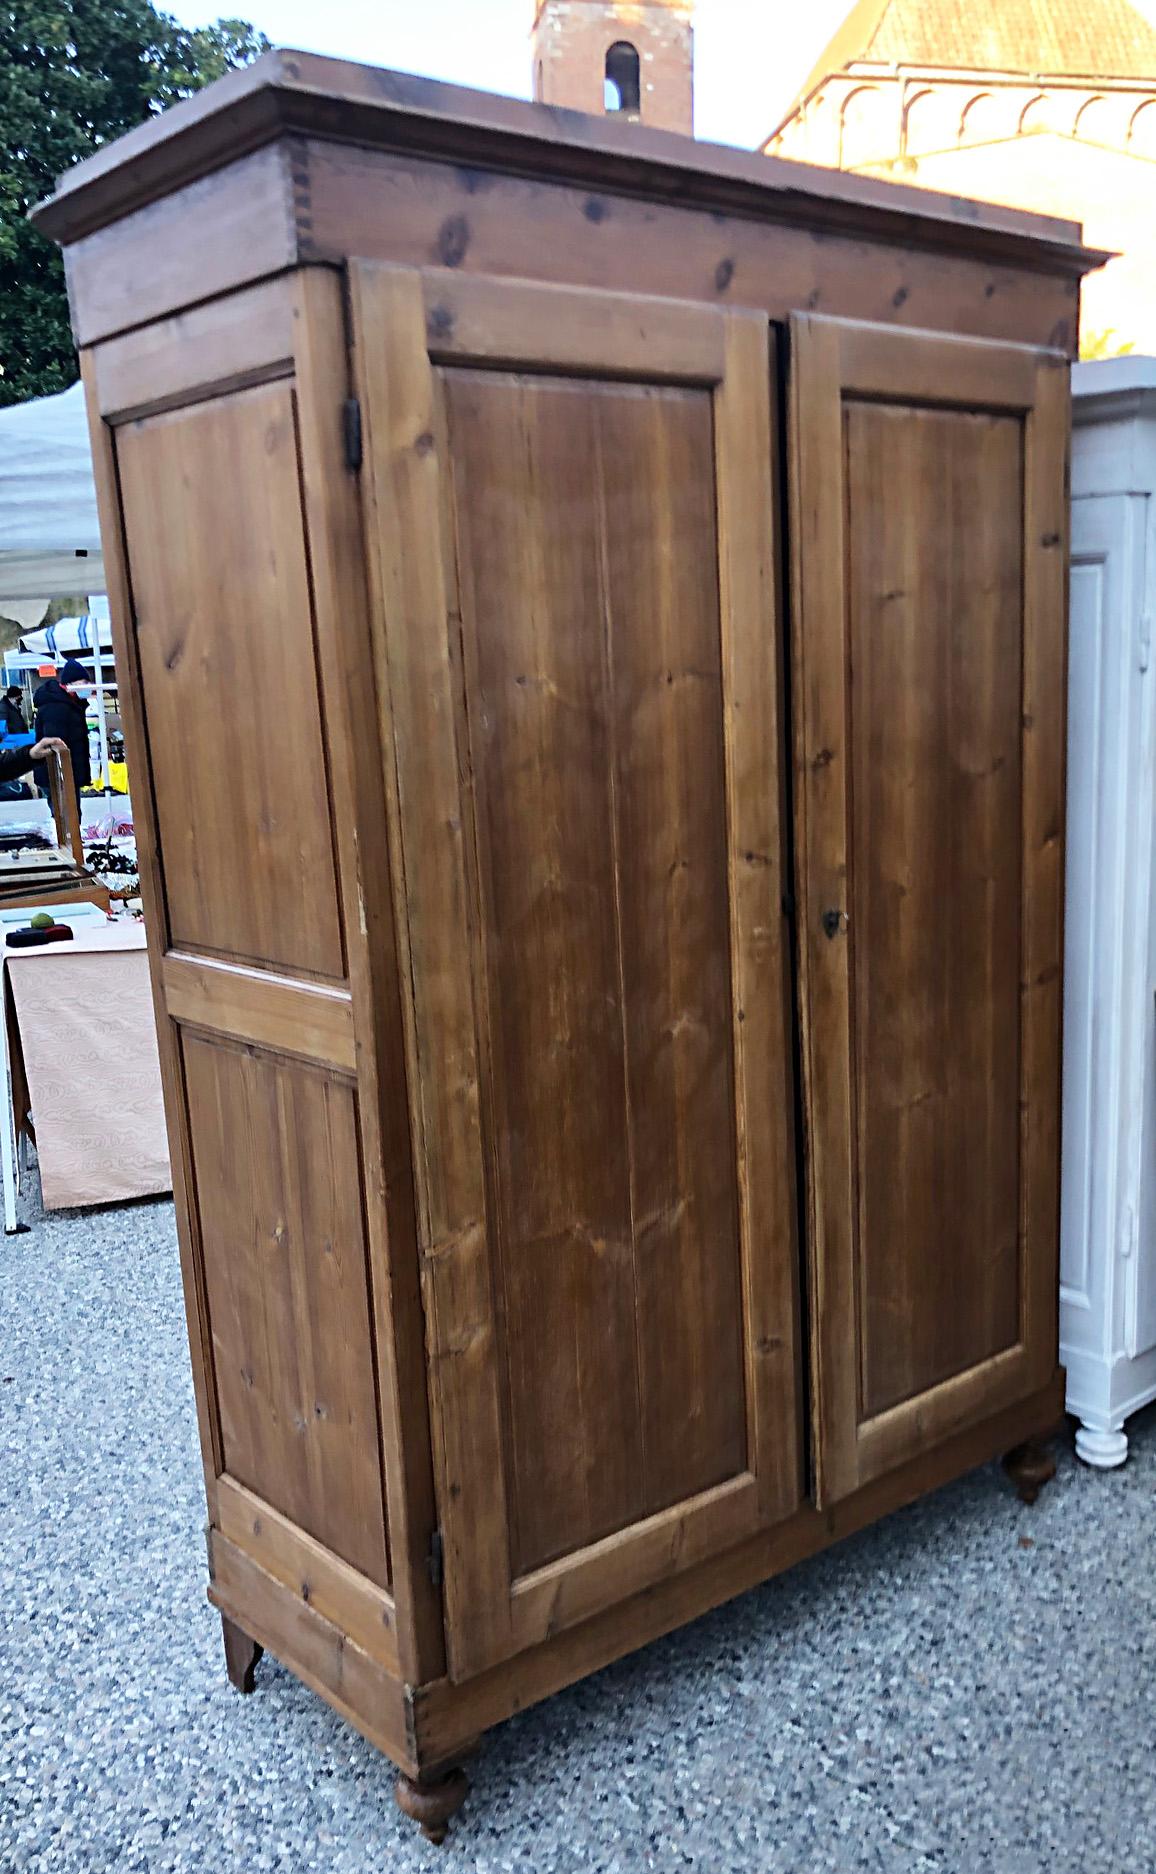 Original antique wardrobe removable, Tuscan  solid fir, with two doors, natural color with one internal drawer and clothes rail.
Size cm: 140 + 10 frame x 59 x 218 H
Year 1880.
Comes from an old country house in the Lucca area of Tuscany.
The paint